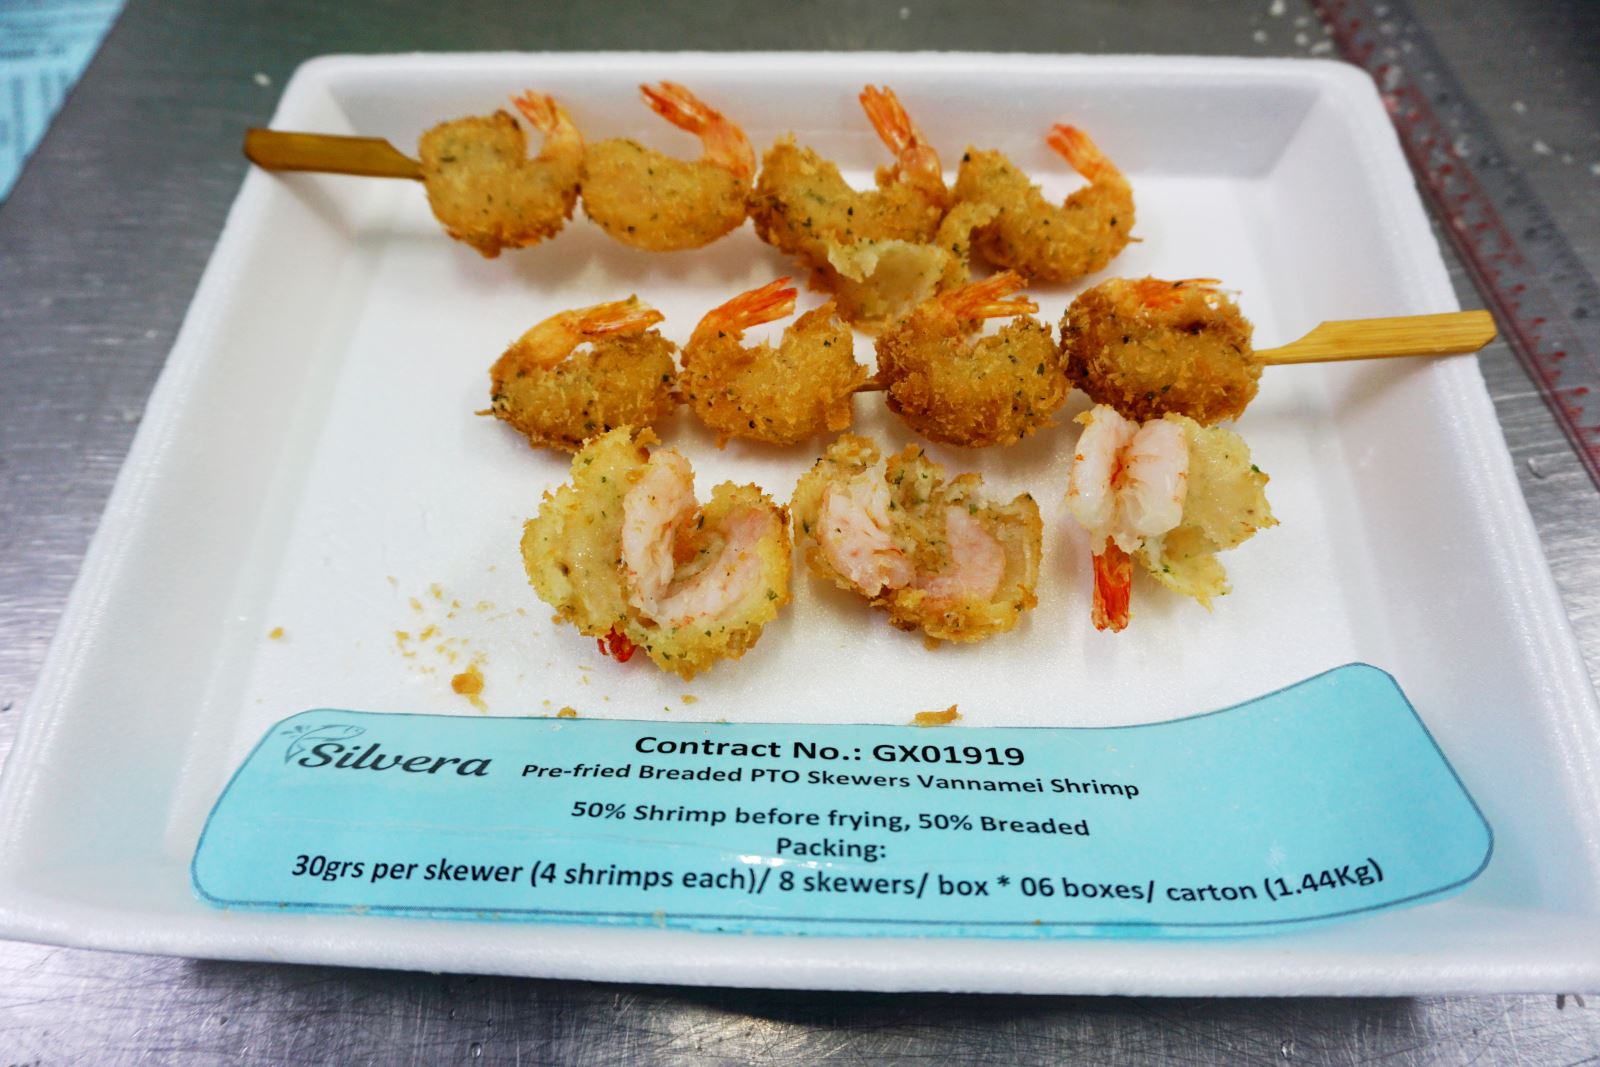 Pre-fried Skewered Vannamei Shrimp After Being Cooked 